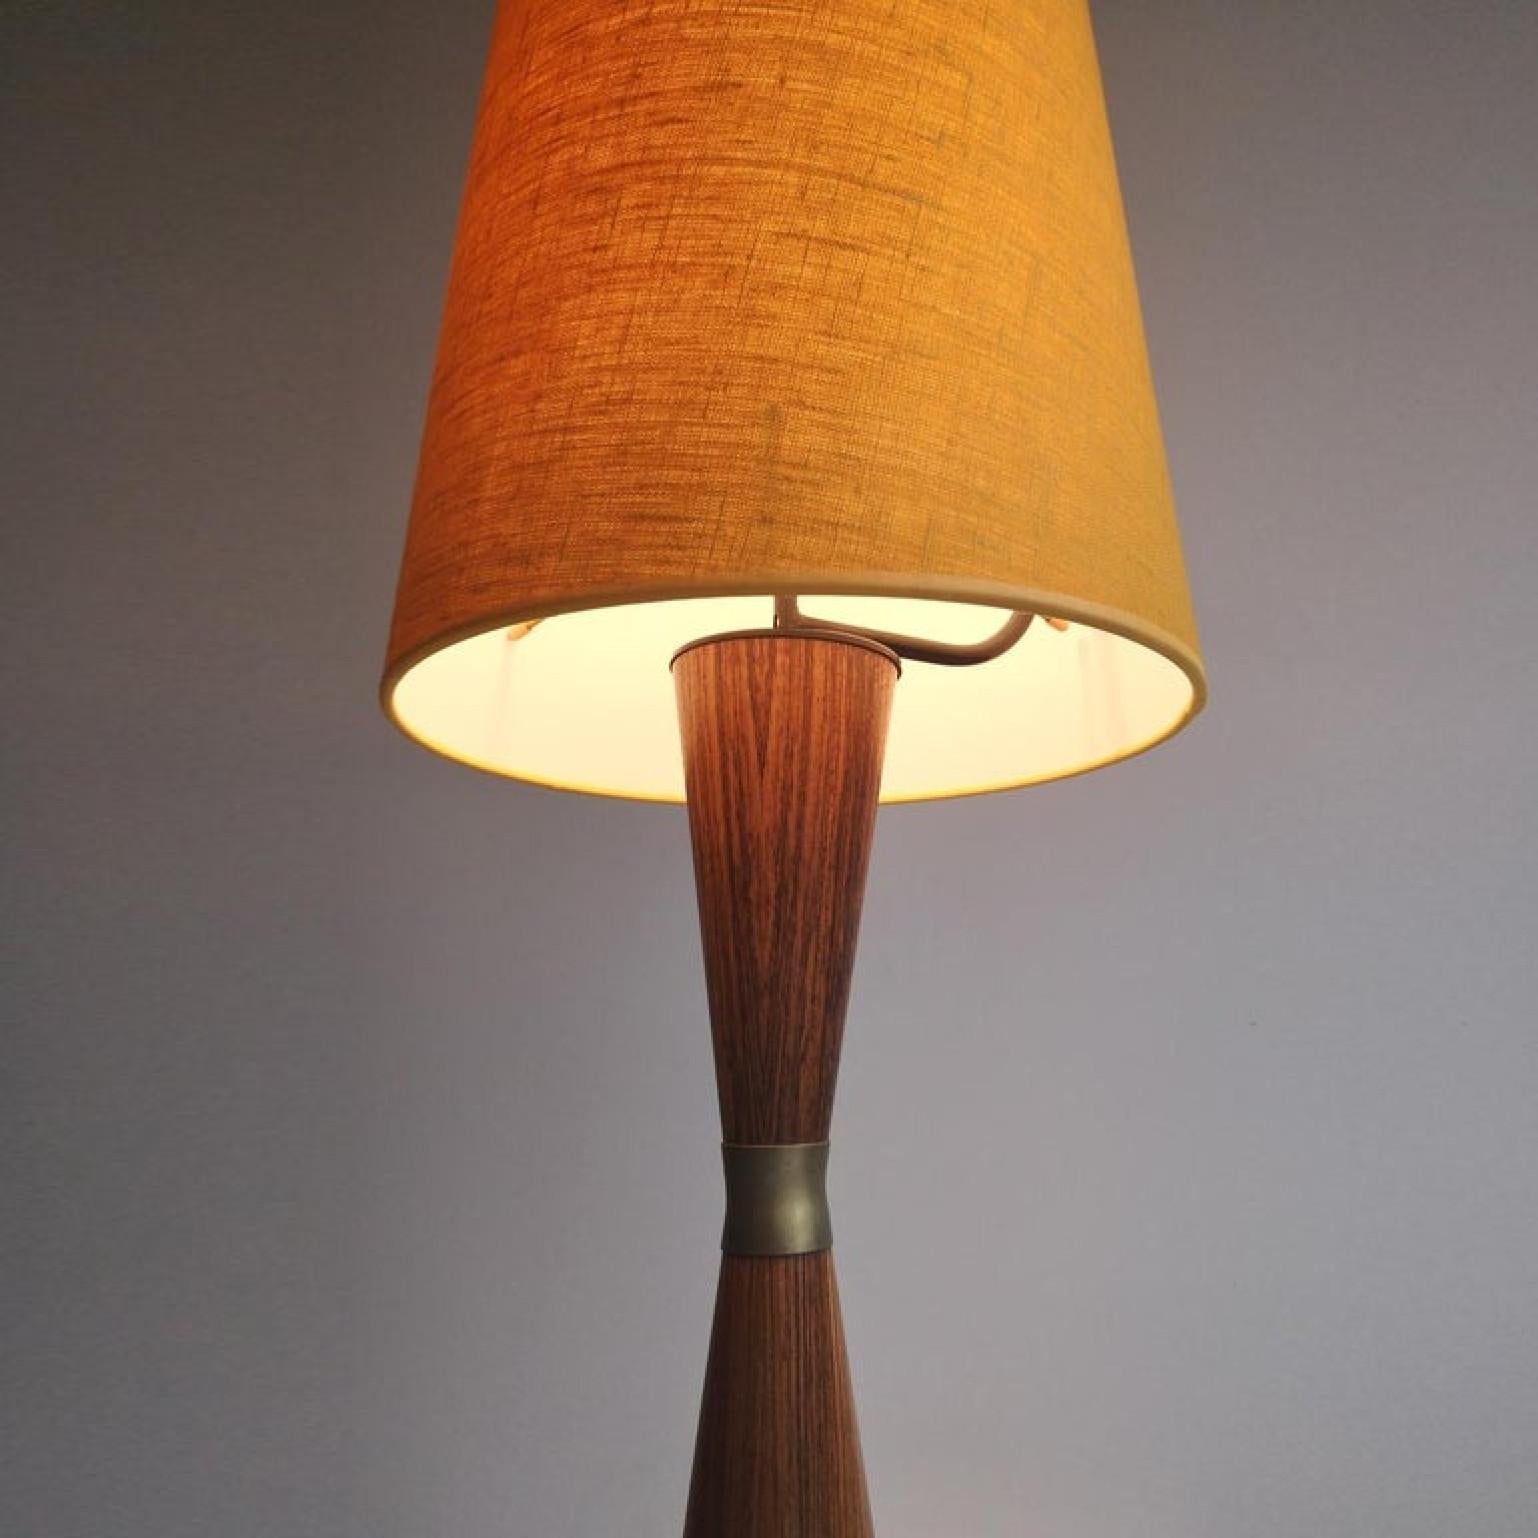 Mid-20th Century Danish Diabolo Floor Lamp with New Upholstered Lampshade, 1960s For Sale